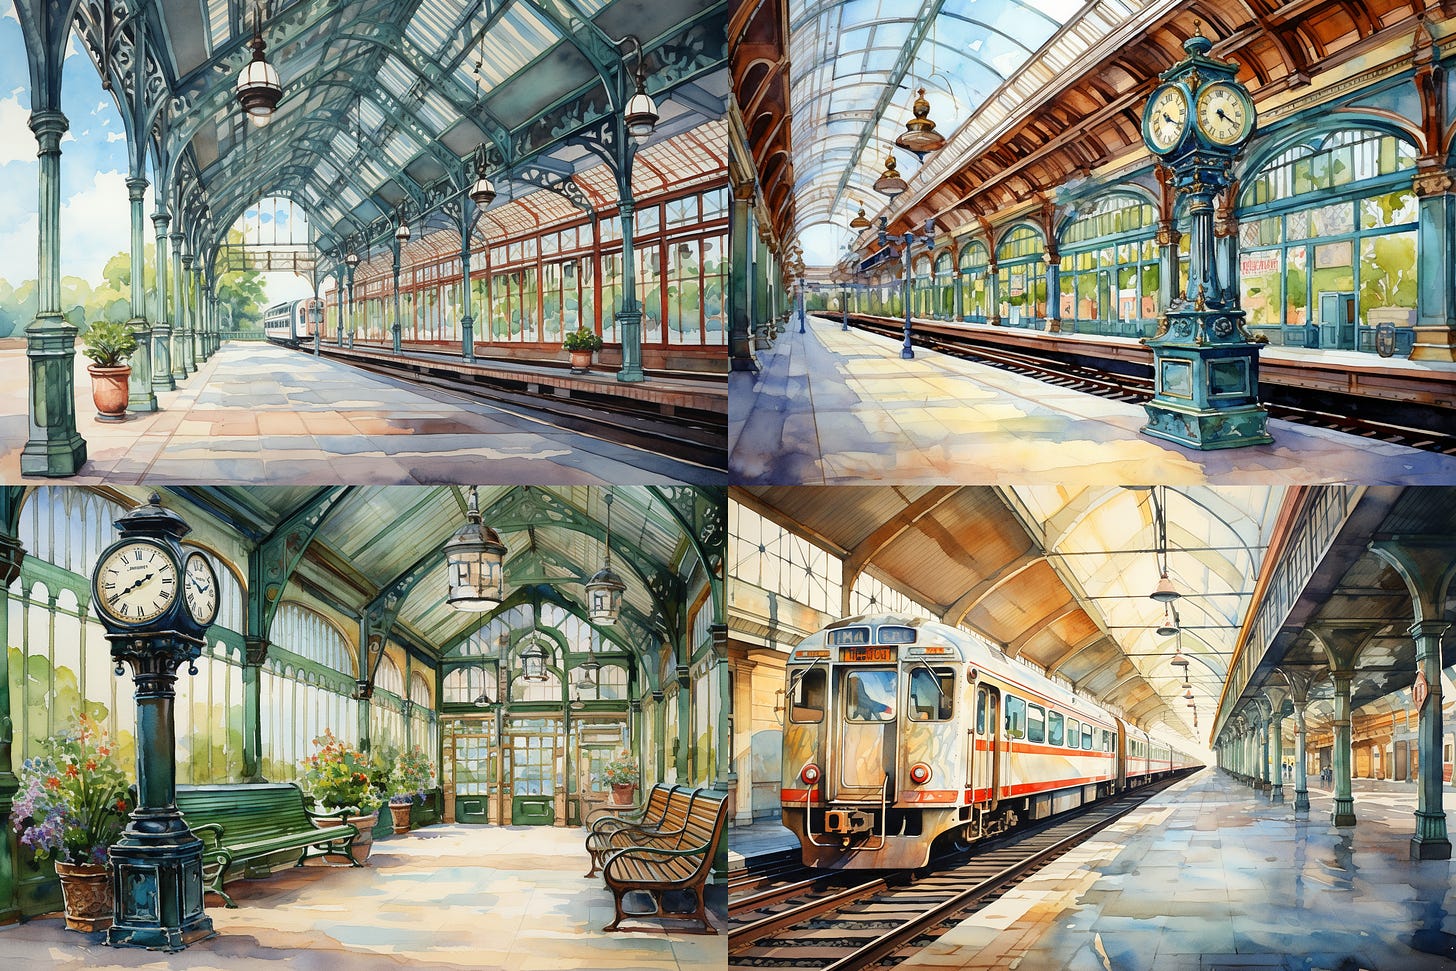 Four-image Midjourney grid of watercolor paintings of train stations without people